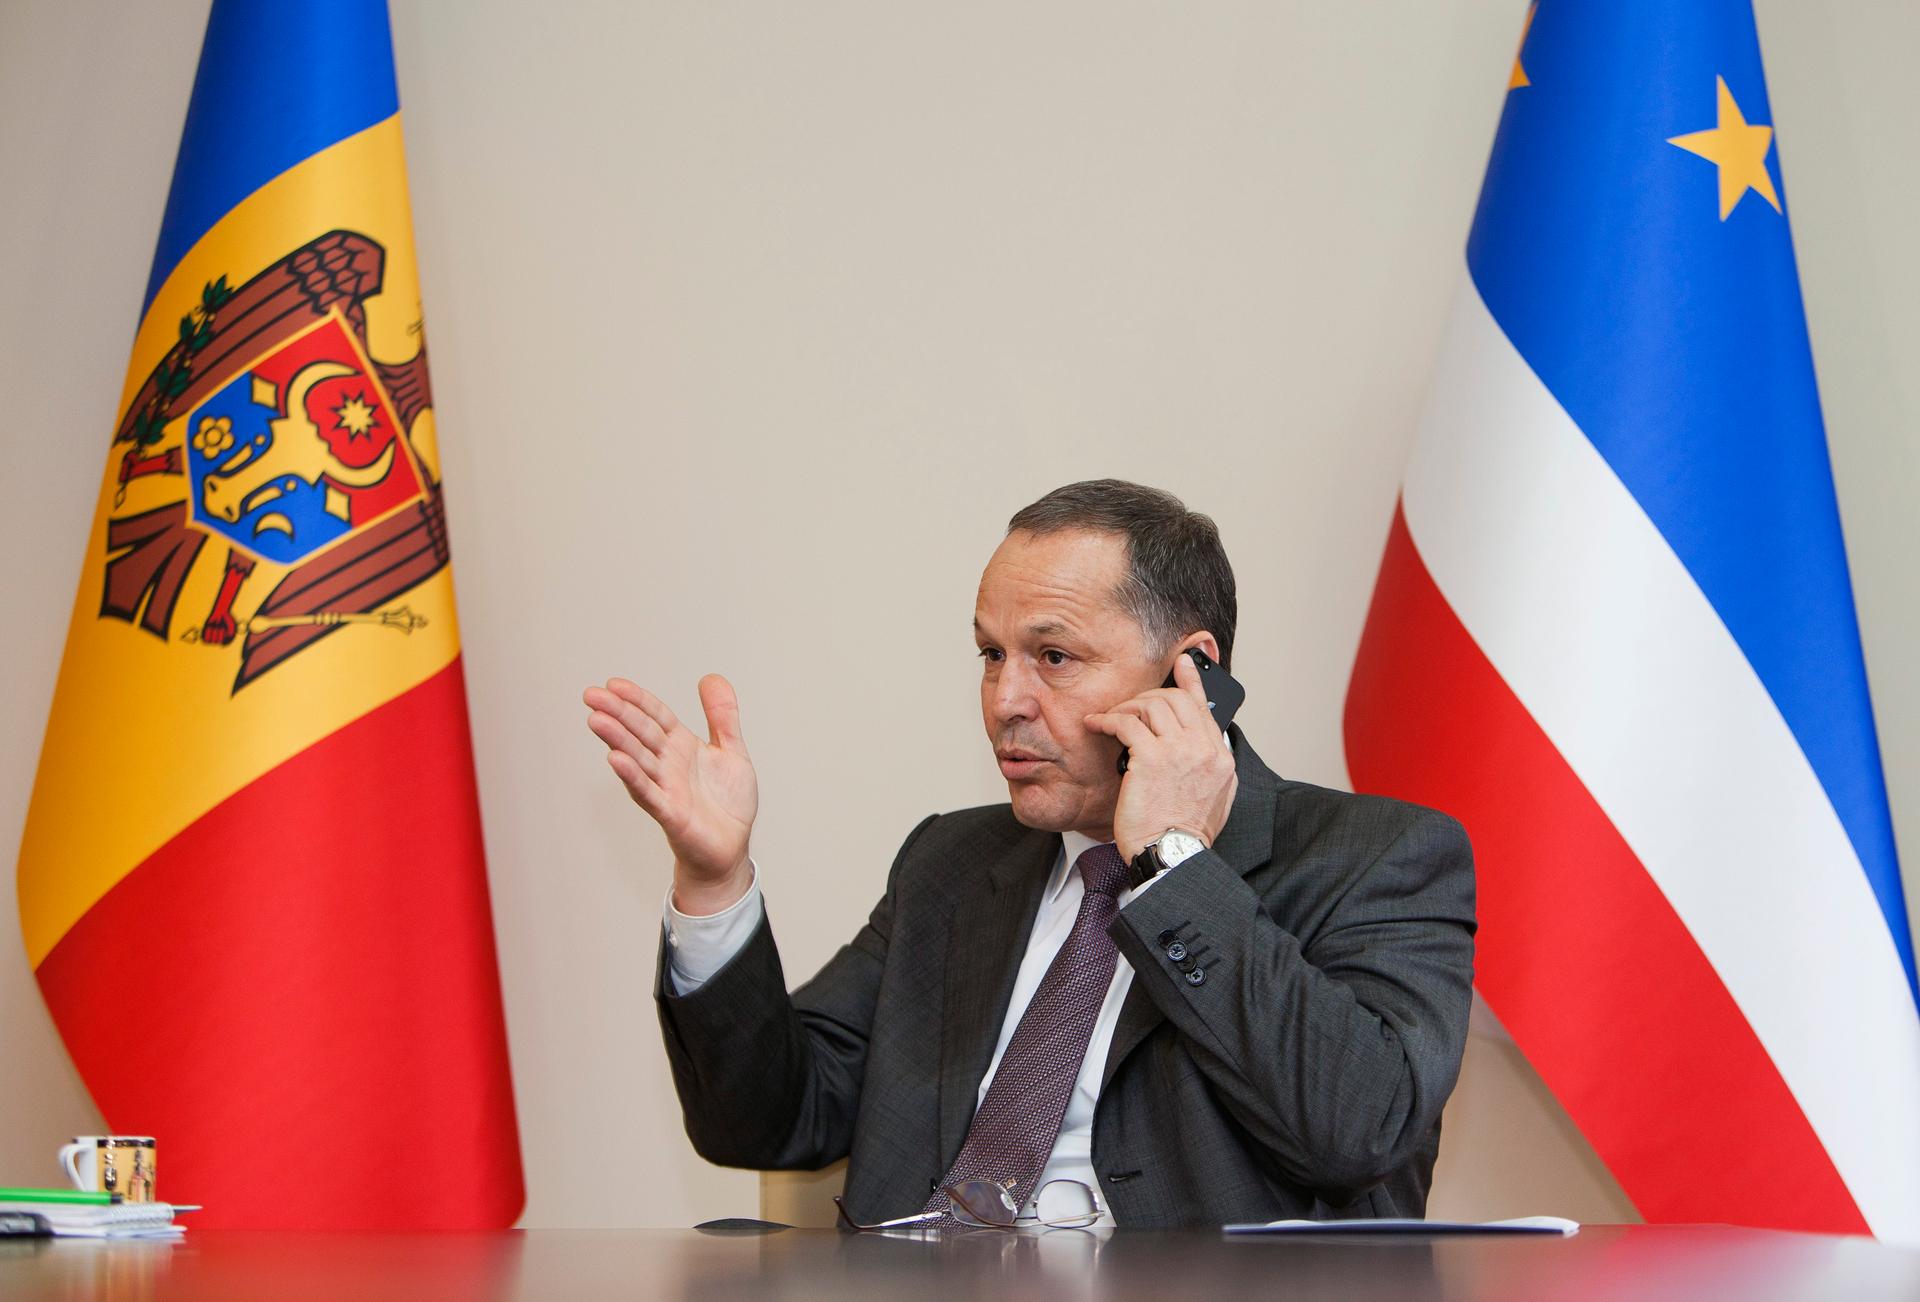 Mihail Formuzal, governor of the autonomous Moldovan province Gagauzia, speaks on the phone during an interview at his office in Comrat, the administrative centre of Gagauzia.